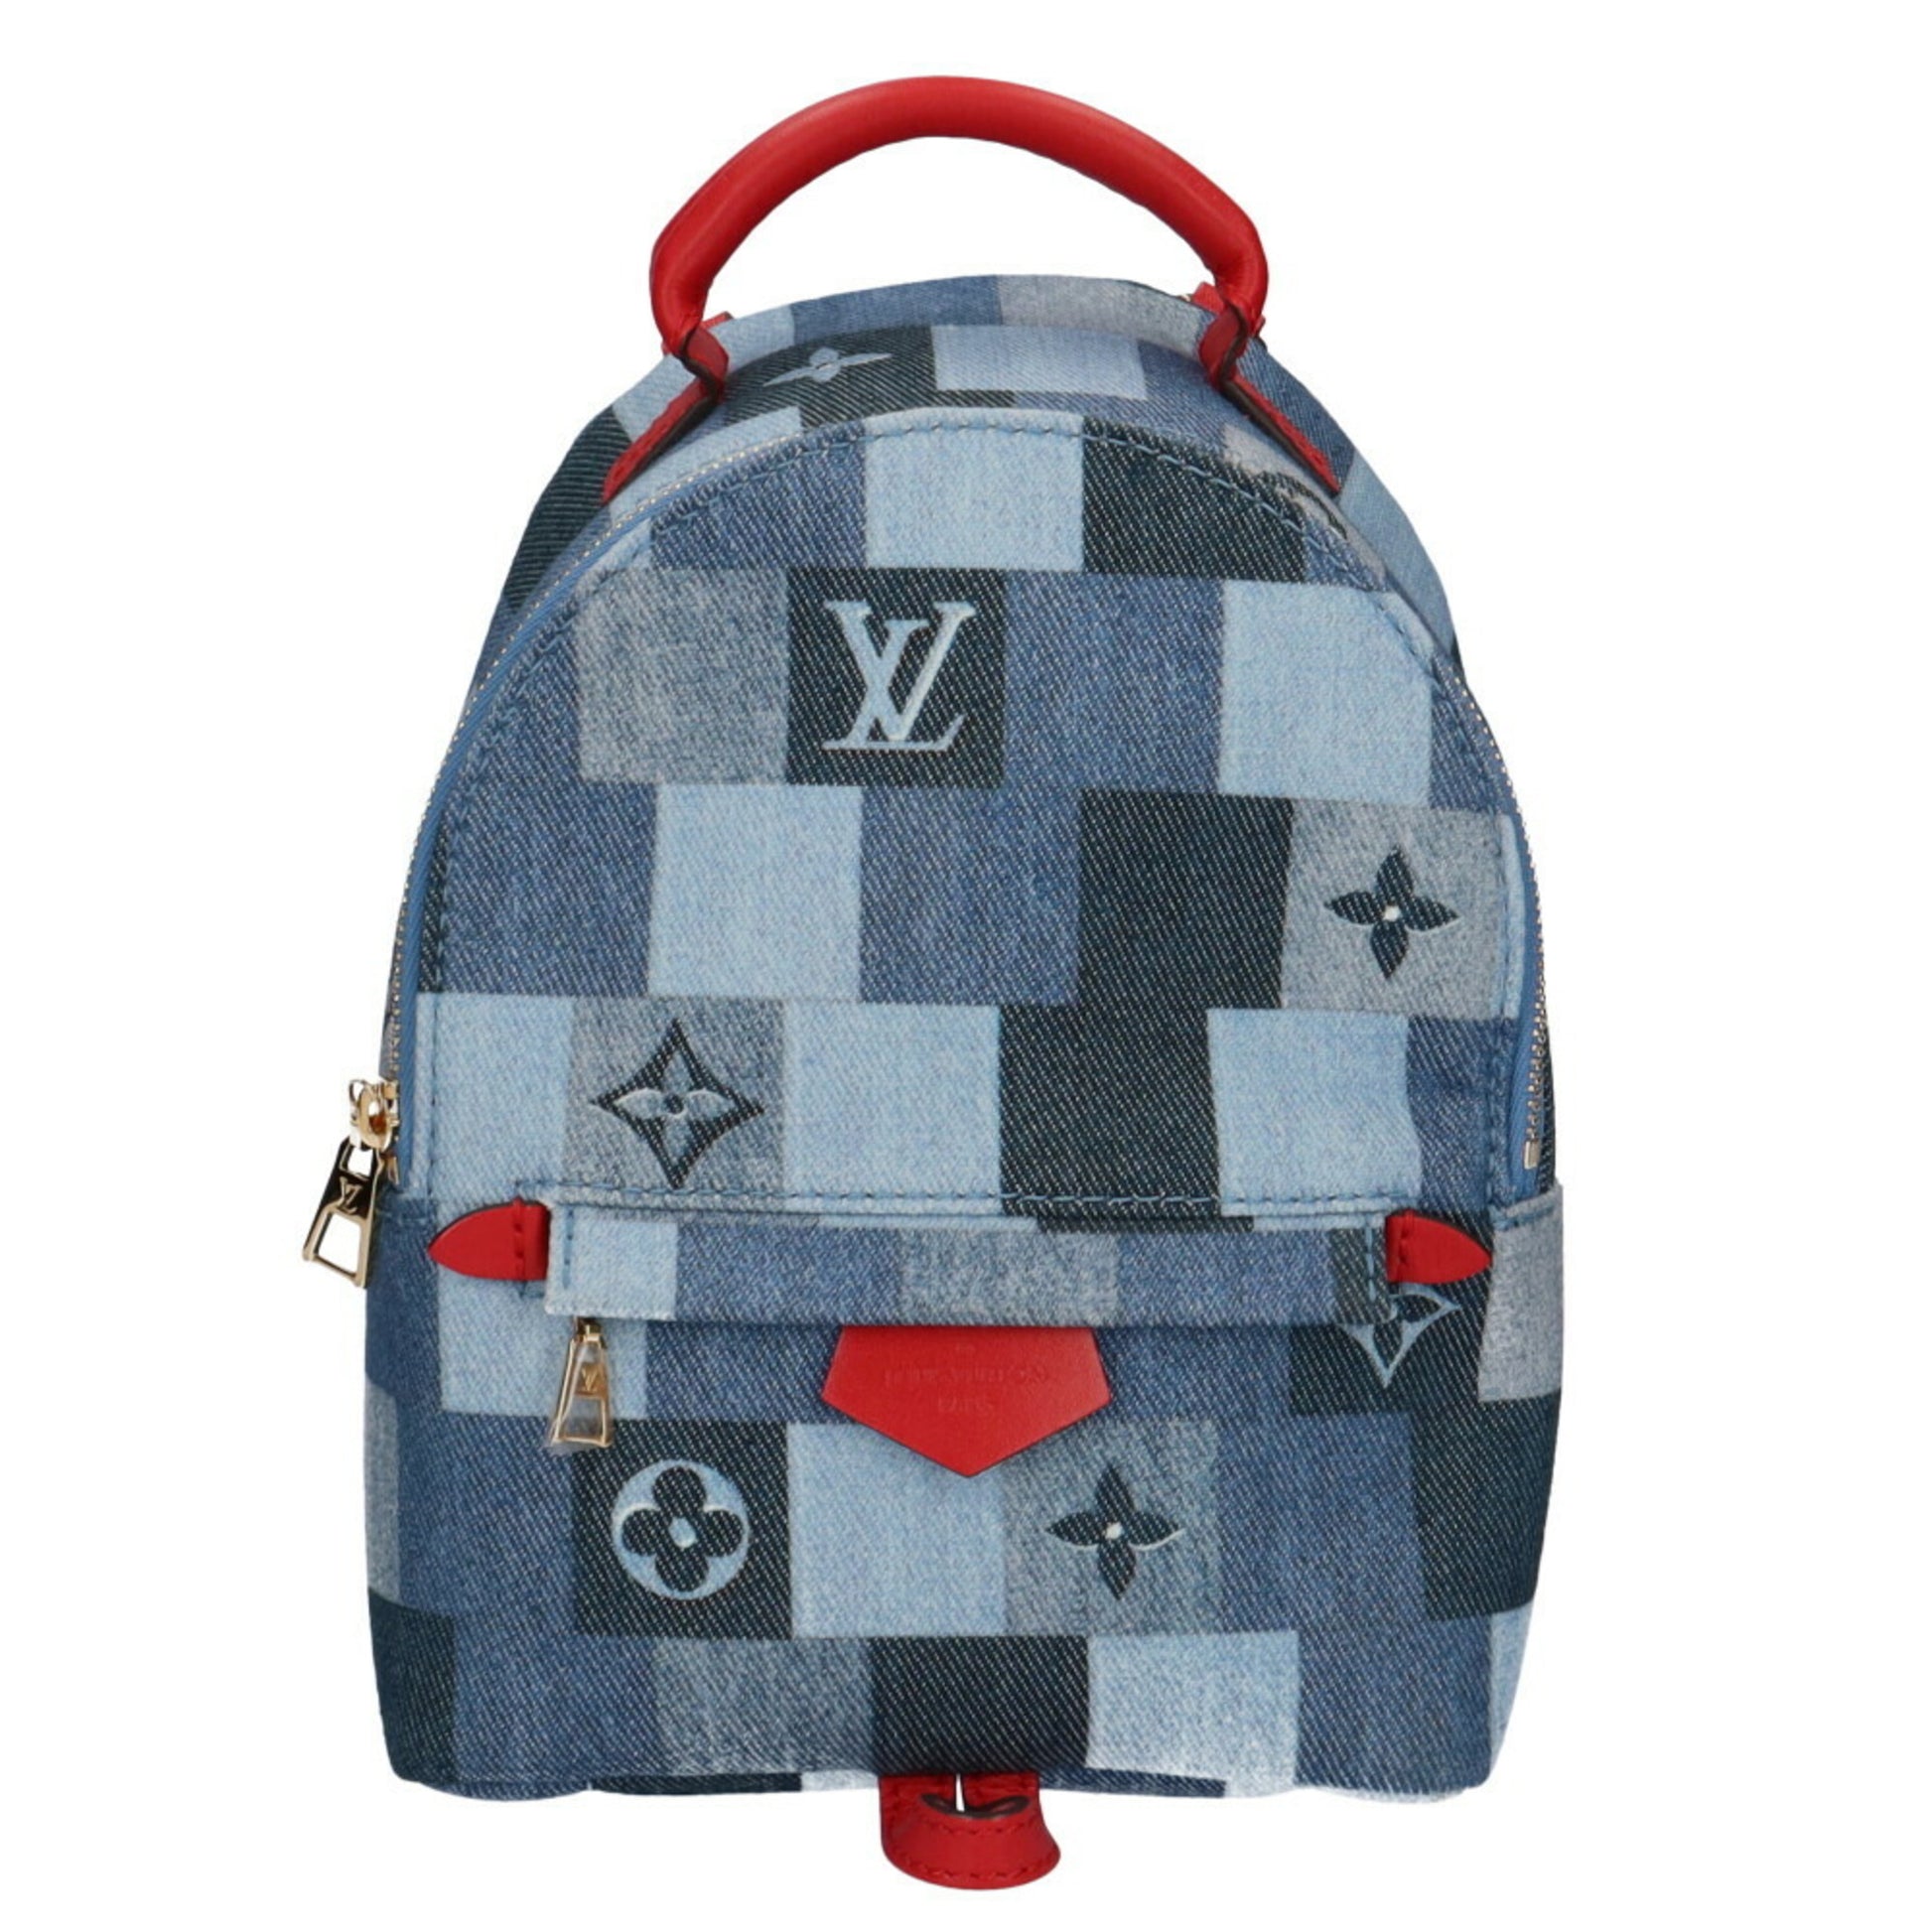 LOUIS VUITTON Palm Springs Backpack PM Womens ruck sack Daypack